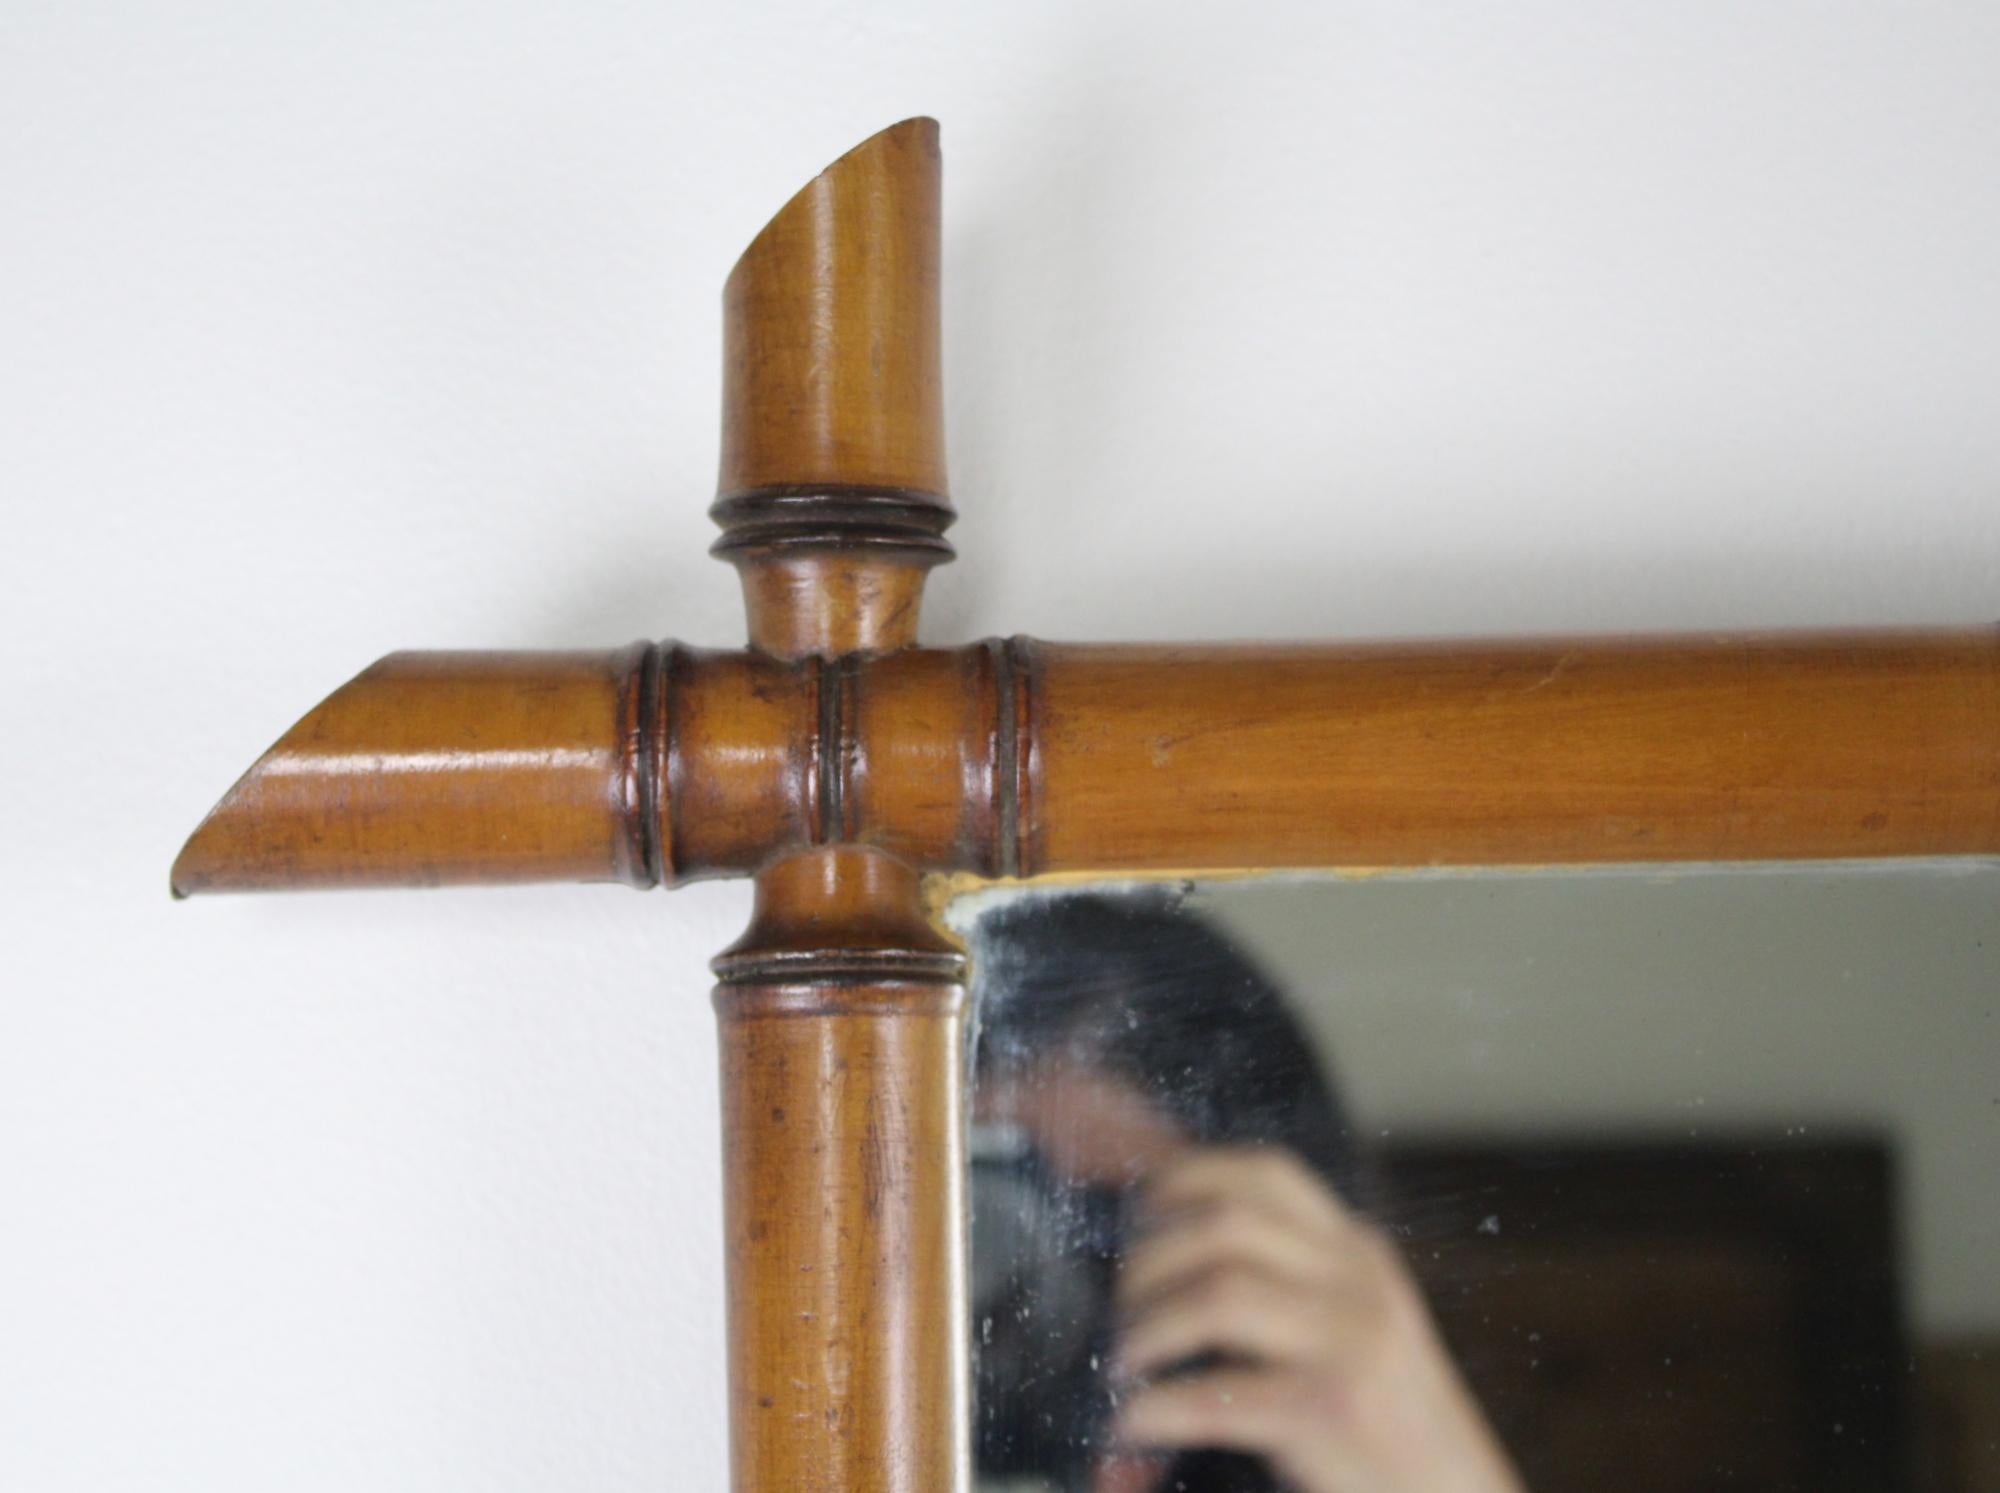 Our French faux-bamboo mirror features a simple yet elegant silhouette, adorned with a honey-colored frame. Each side intersects and crosses the path of the other one. The original glass has some minor wear in the corner, as shown in image #6.